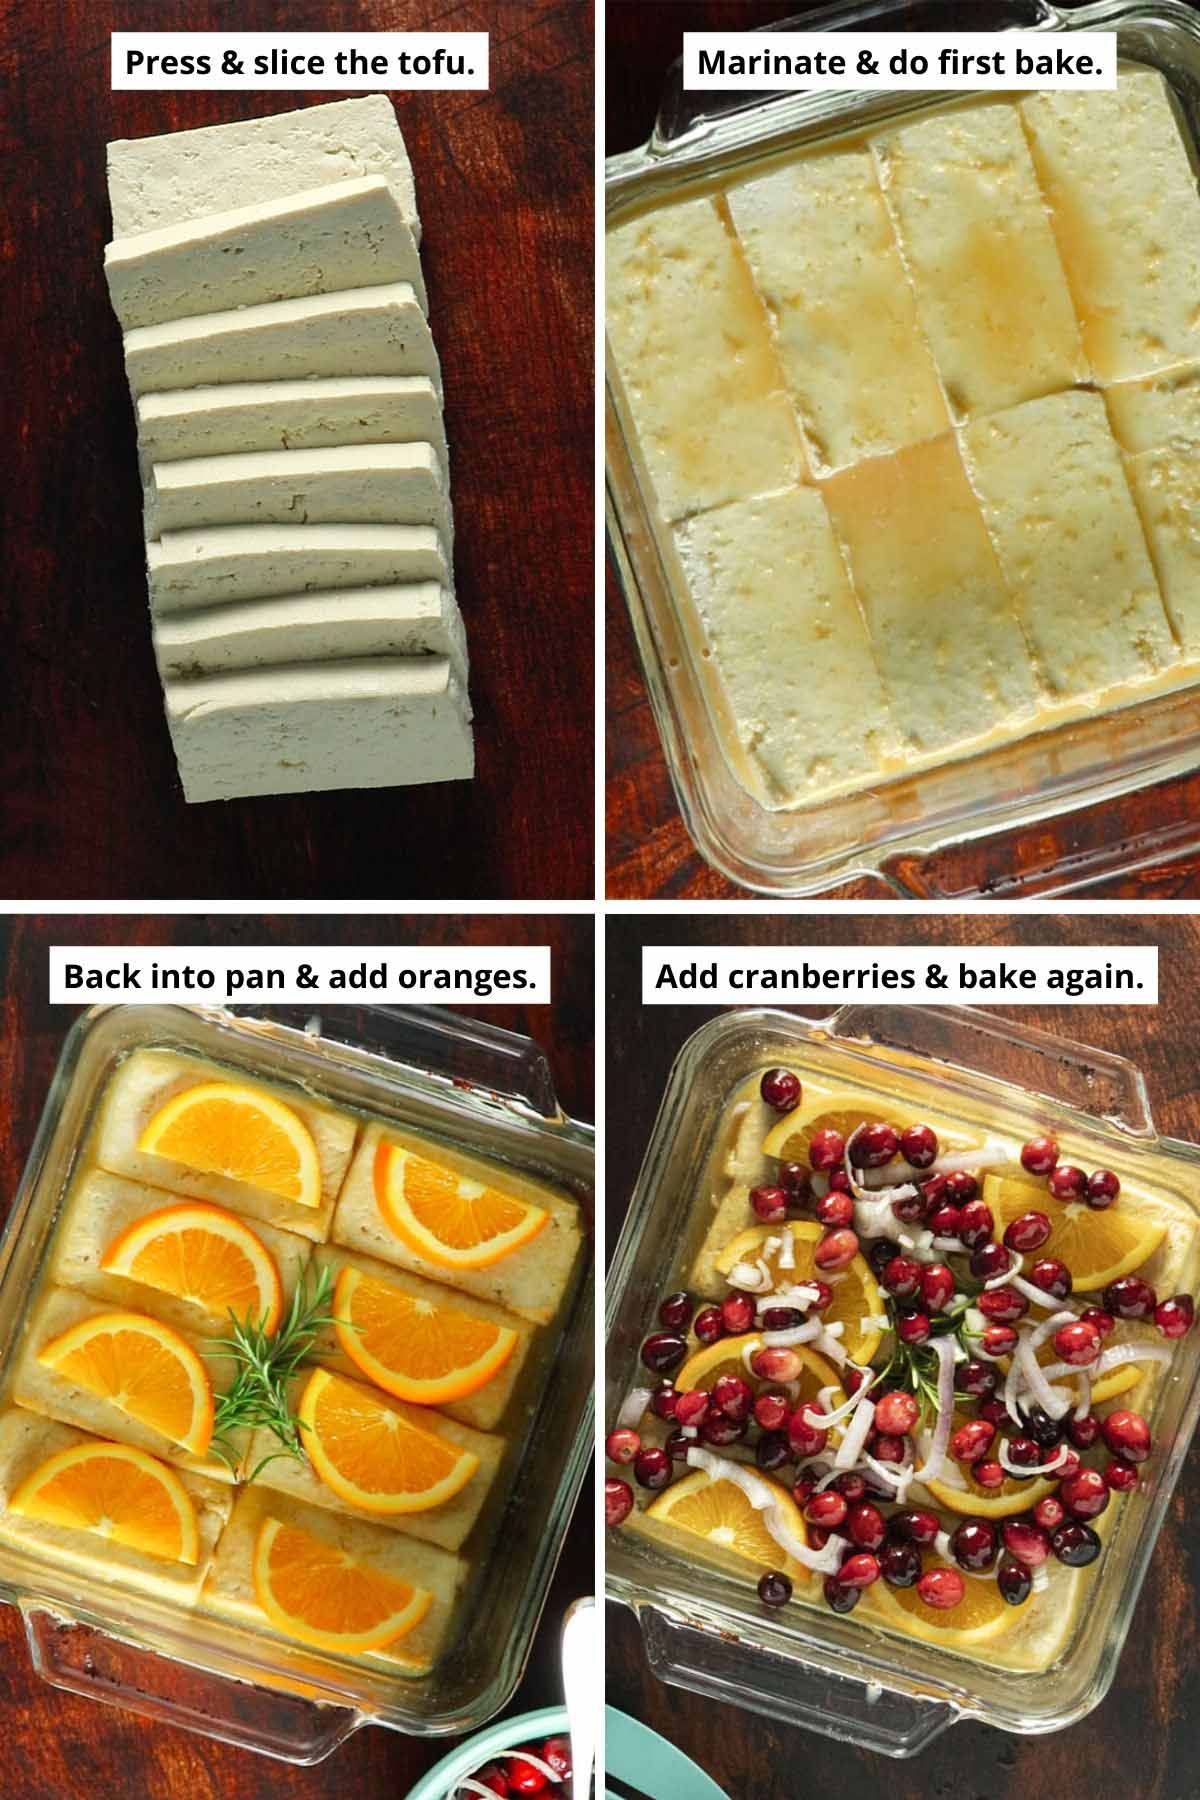 image collage showing how to slice the tofu and marinate it, how to arrange the orange slices and cranberry topping